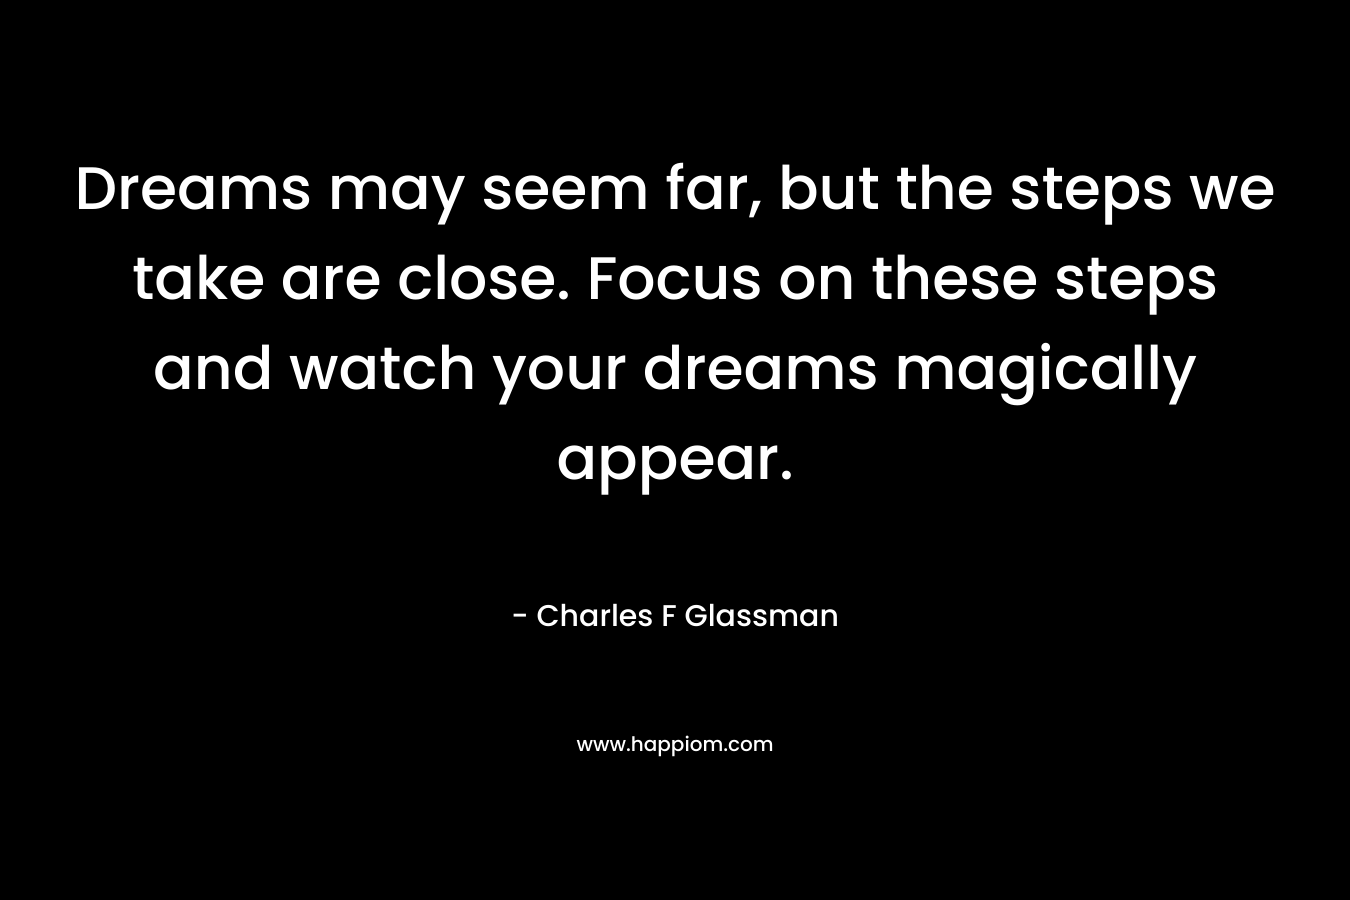 Dreams may seem far, but the steps we take are close. Focus on these steps and watch your dreams magically appear. – Charles F Glassman